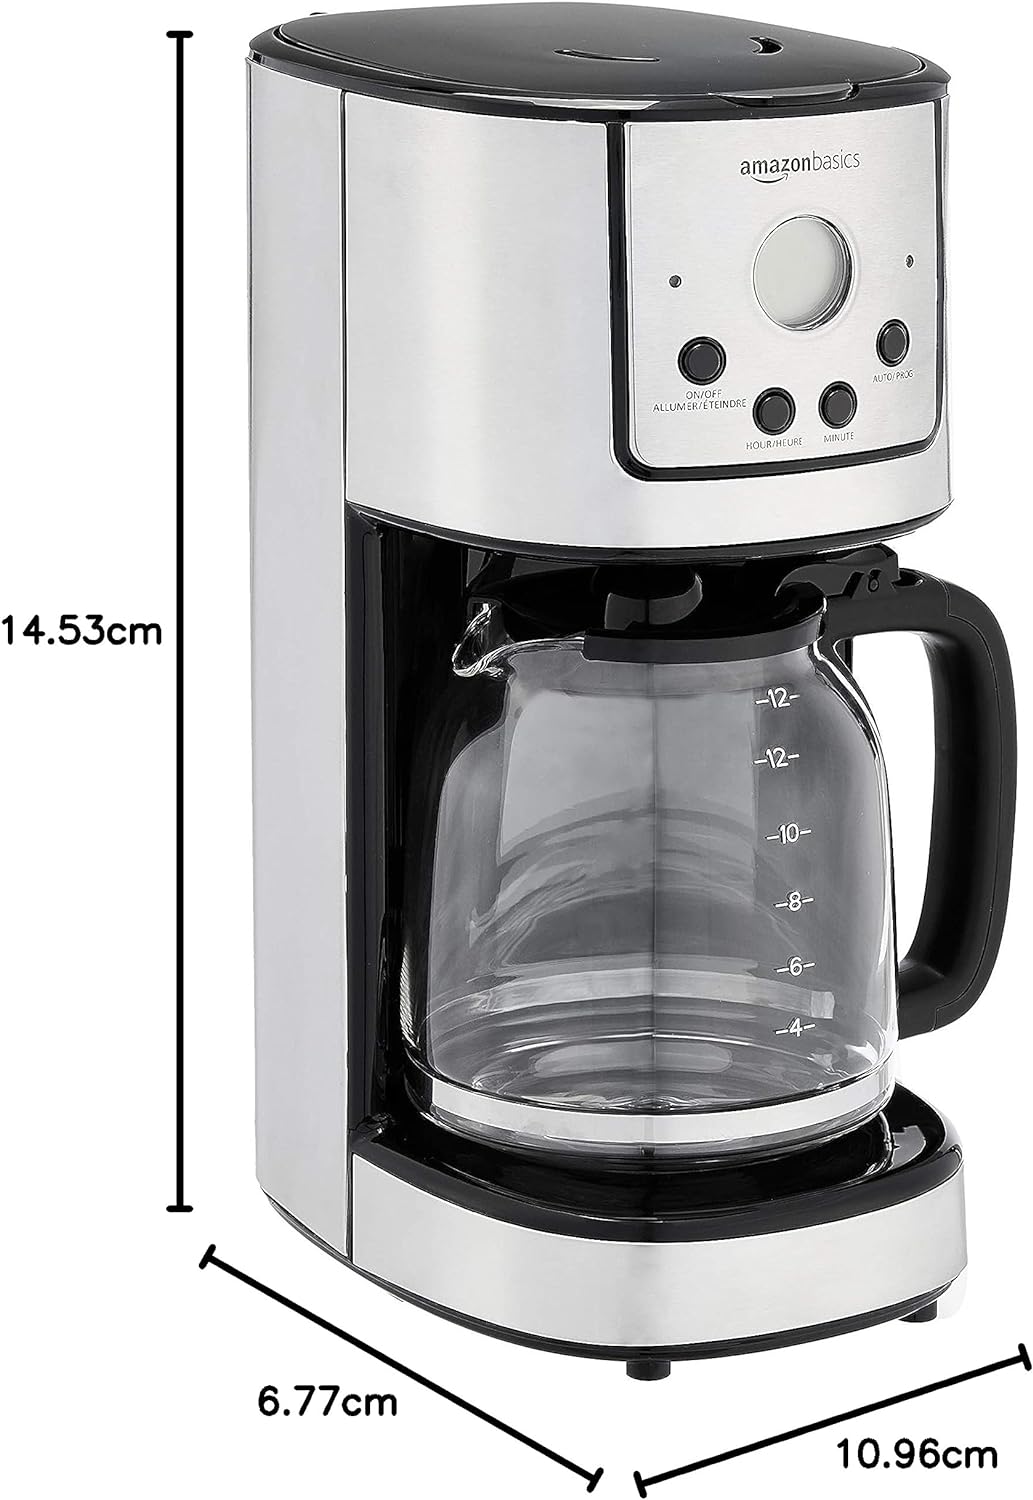 Amazon Basics Programmable Coffeemaker with Carafe and Reusable Filter, Stainless Steel, 12 Cups, Black